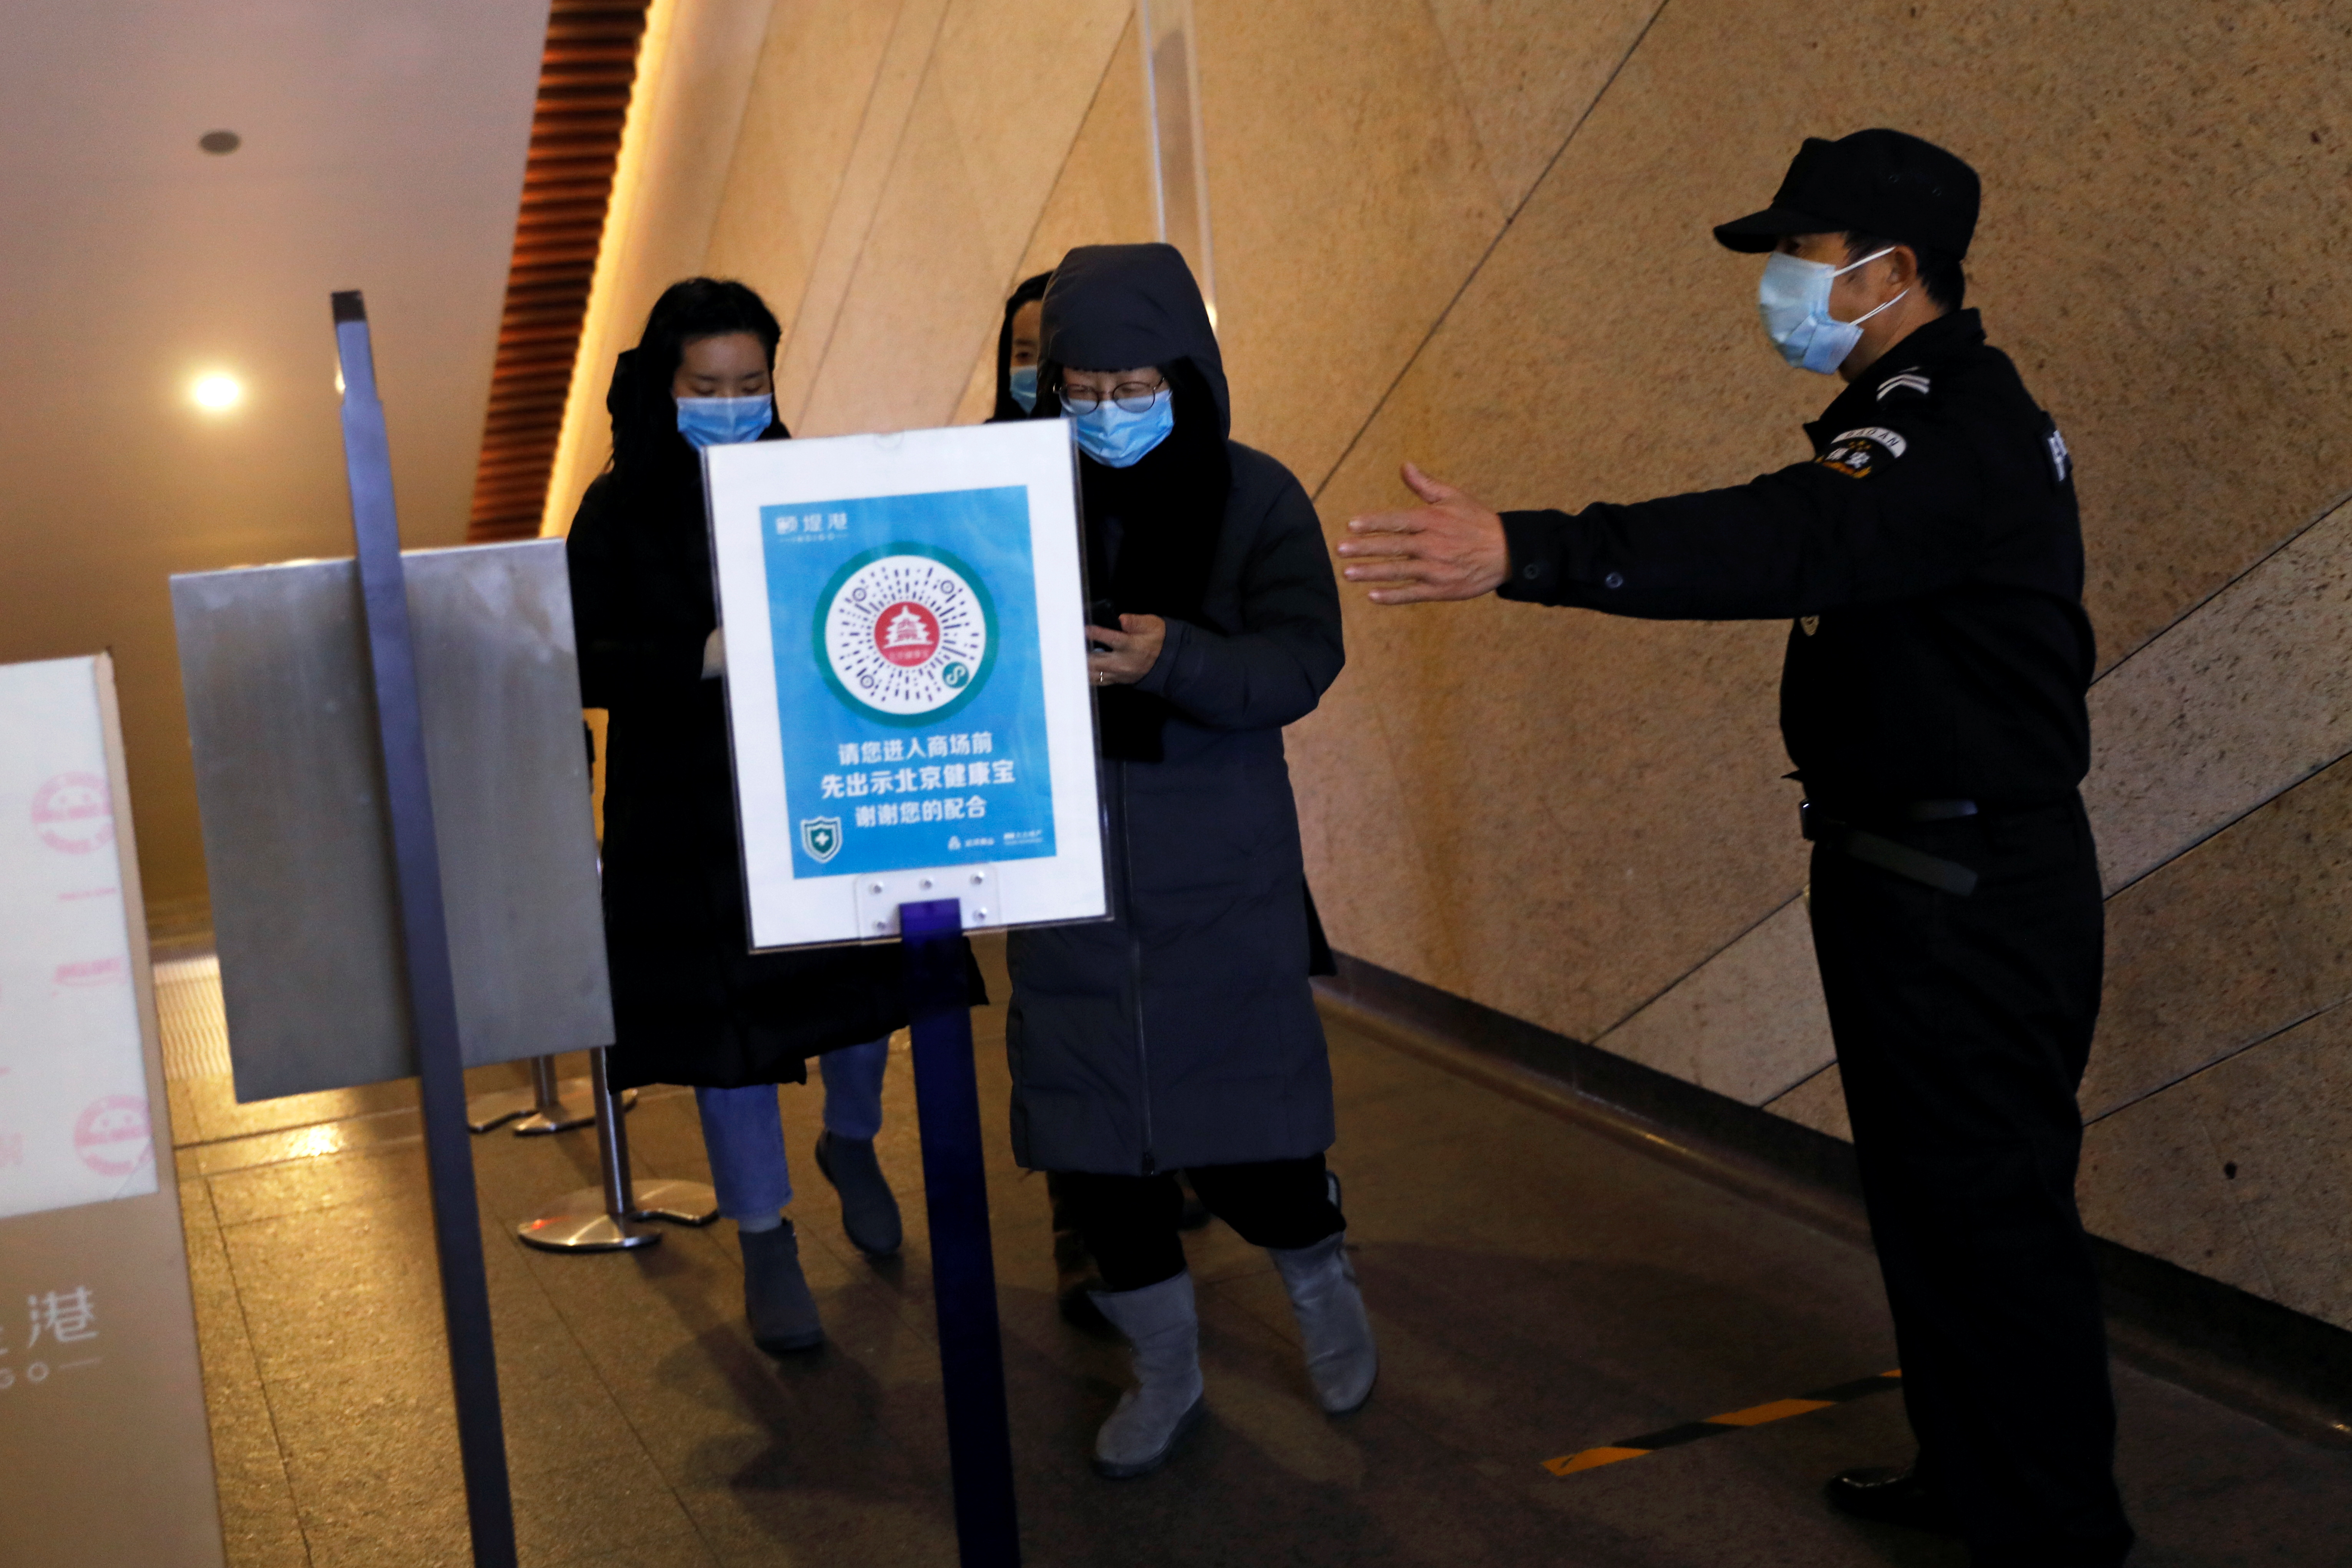 A security guard directs people to scan a QR code to track their health status before entering a shopping complex, following the new cases of the coronavirus disease (COVID-19) in Beijing